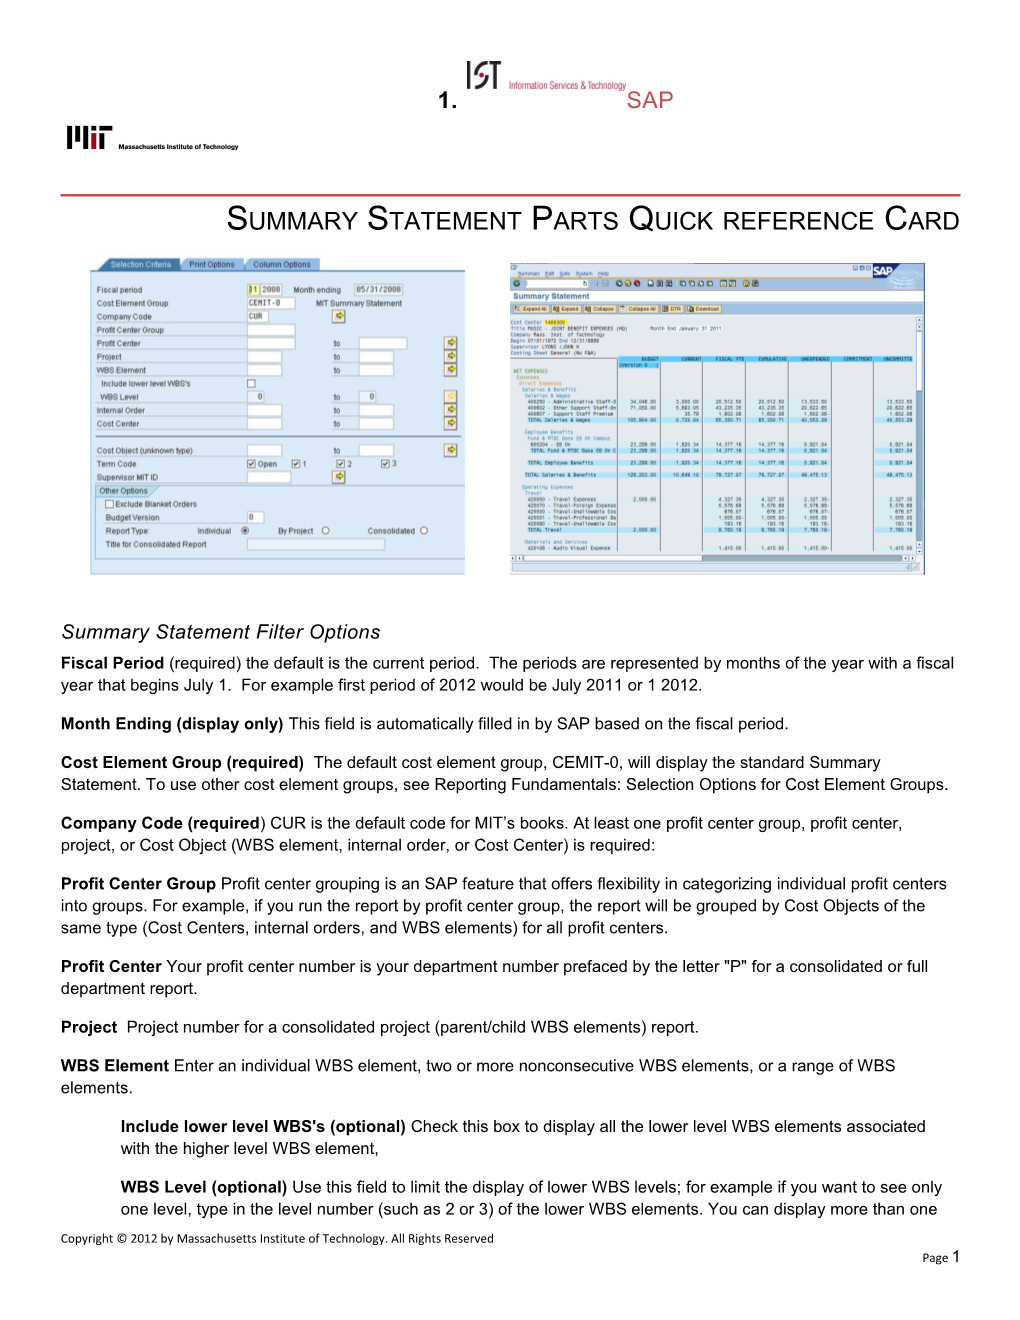 Summary Statement Parts Quick Reference Card